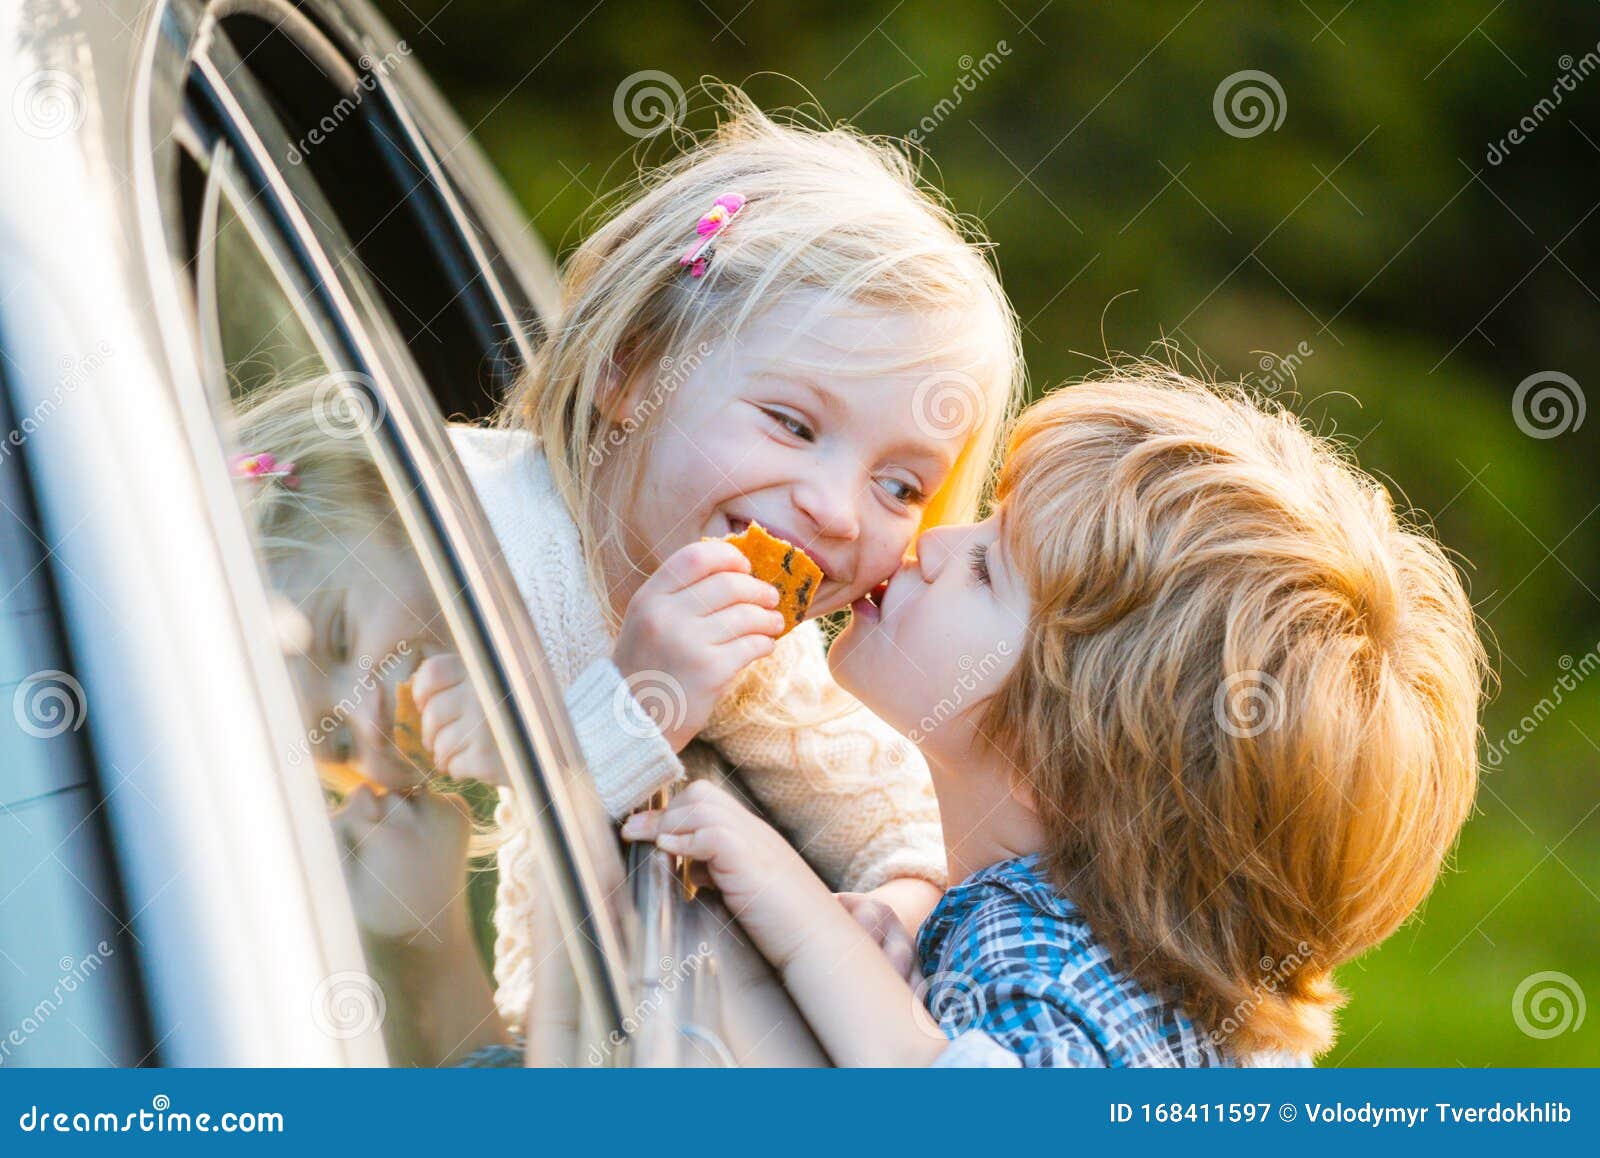 Happy Valentines Day. Valentines Greeting Card. Funny Kids Kiss. the Real  History of Valentines Day. Stock Image - Image of love, hugging: 168411597